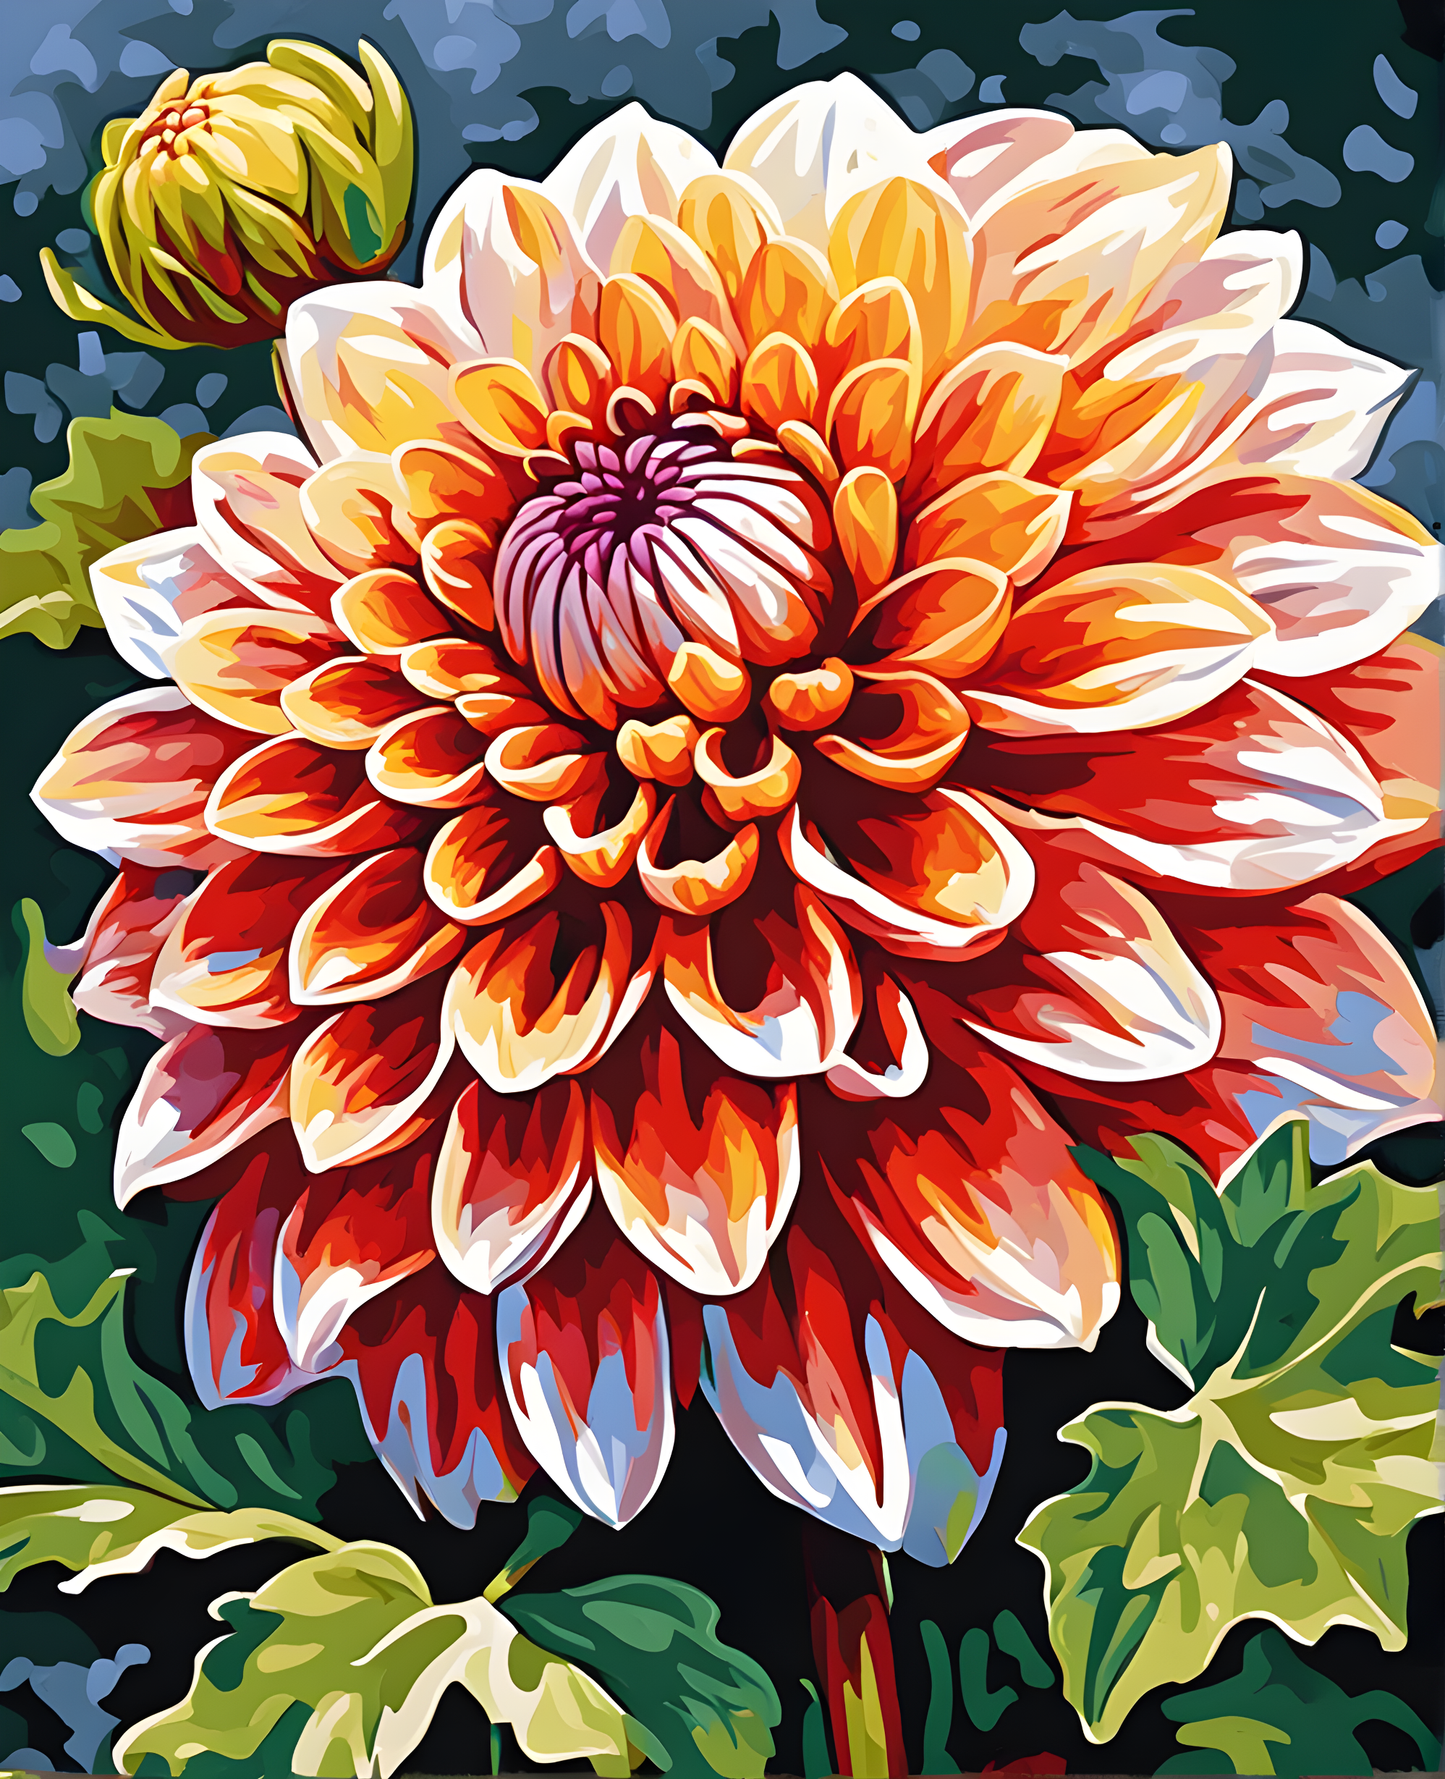 Flowers Collection OD (56) - Dahlia - Van-Go Paint-By-Number Kit